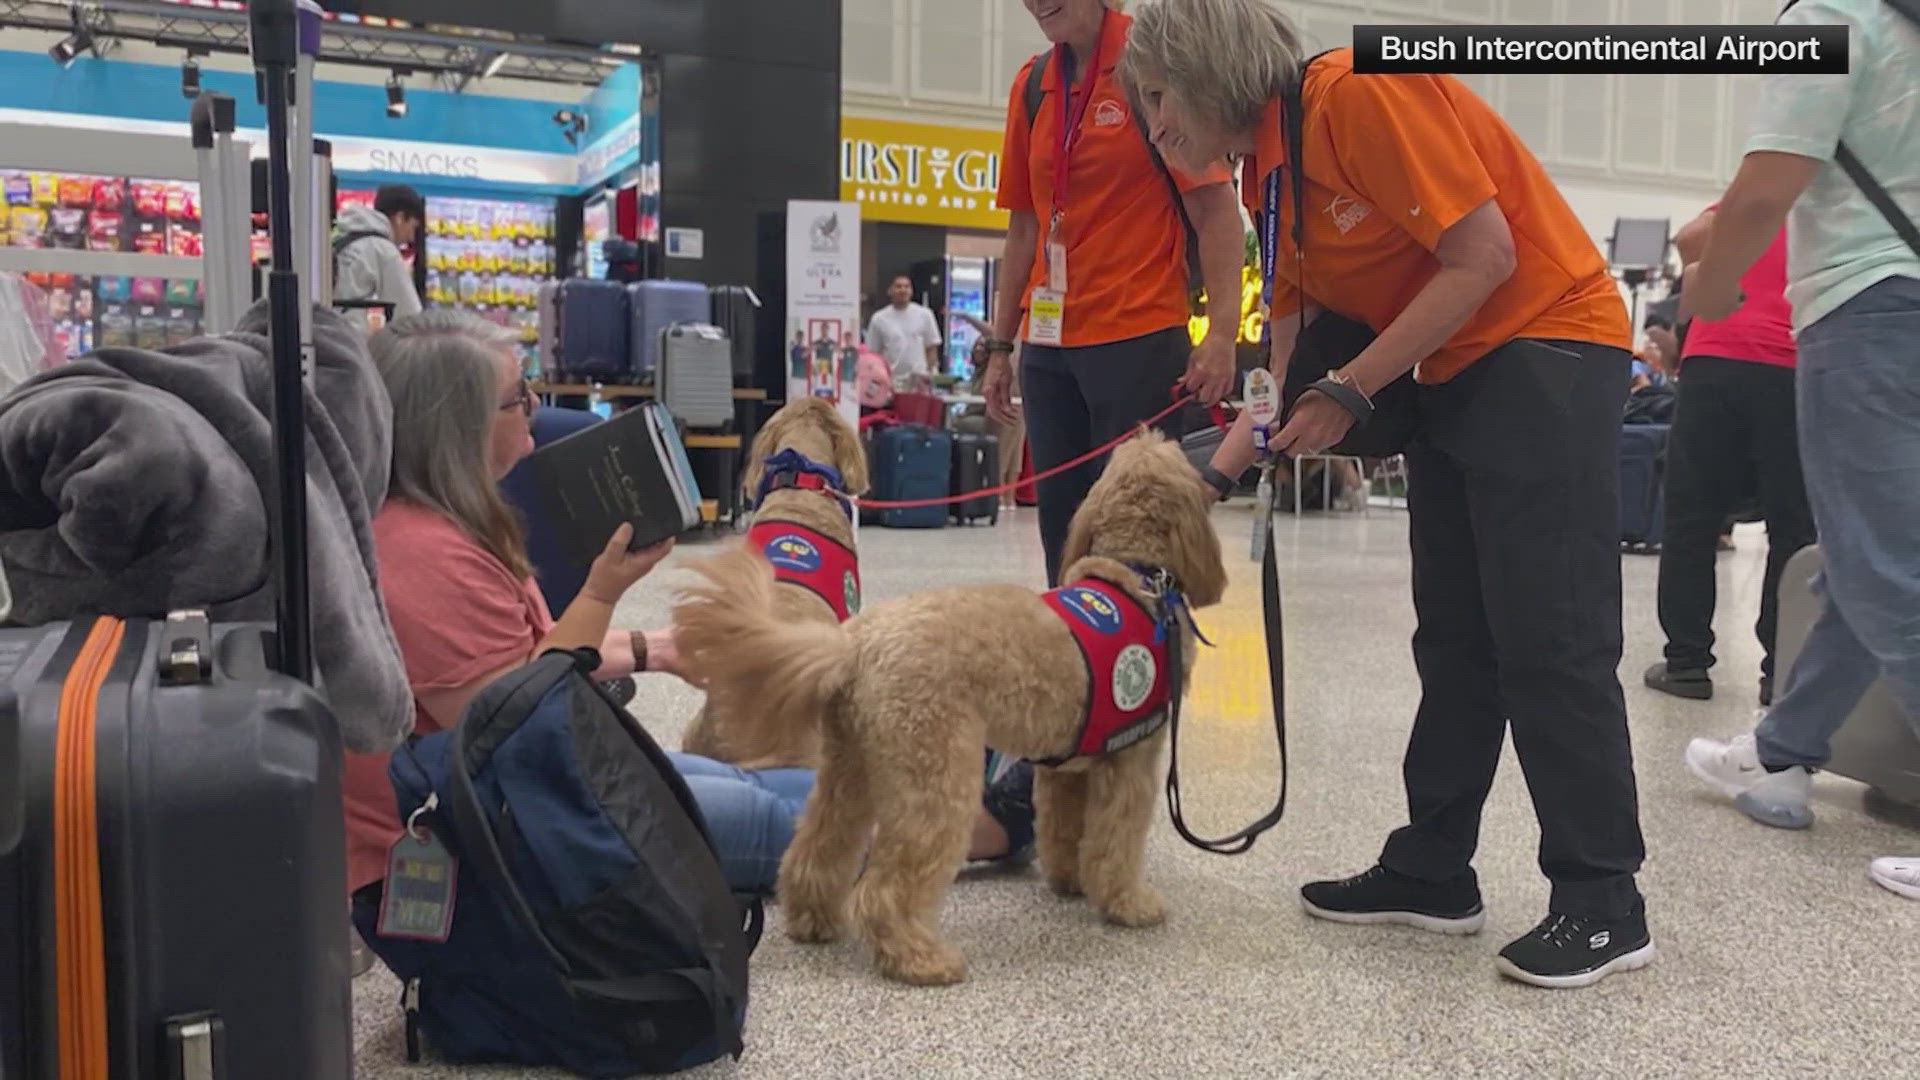 The therapy dogs arrived at Bush Intercontinental Airport Friday morning to bring smiles to stranded passengers.